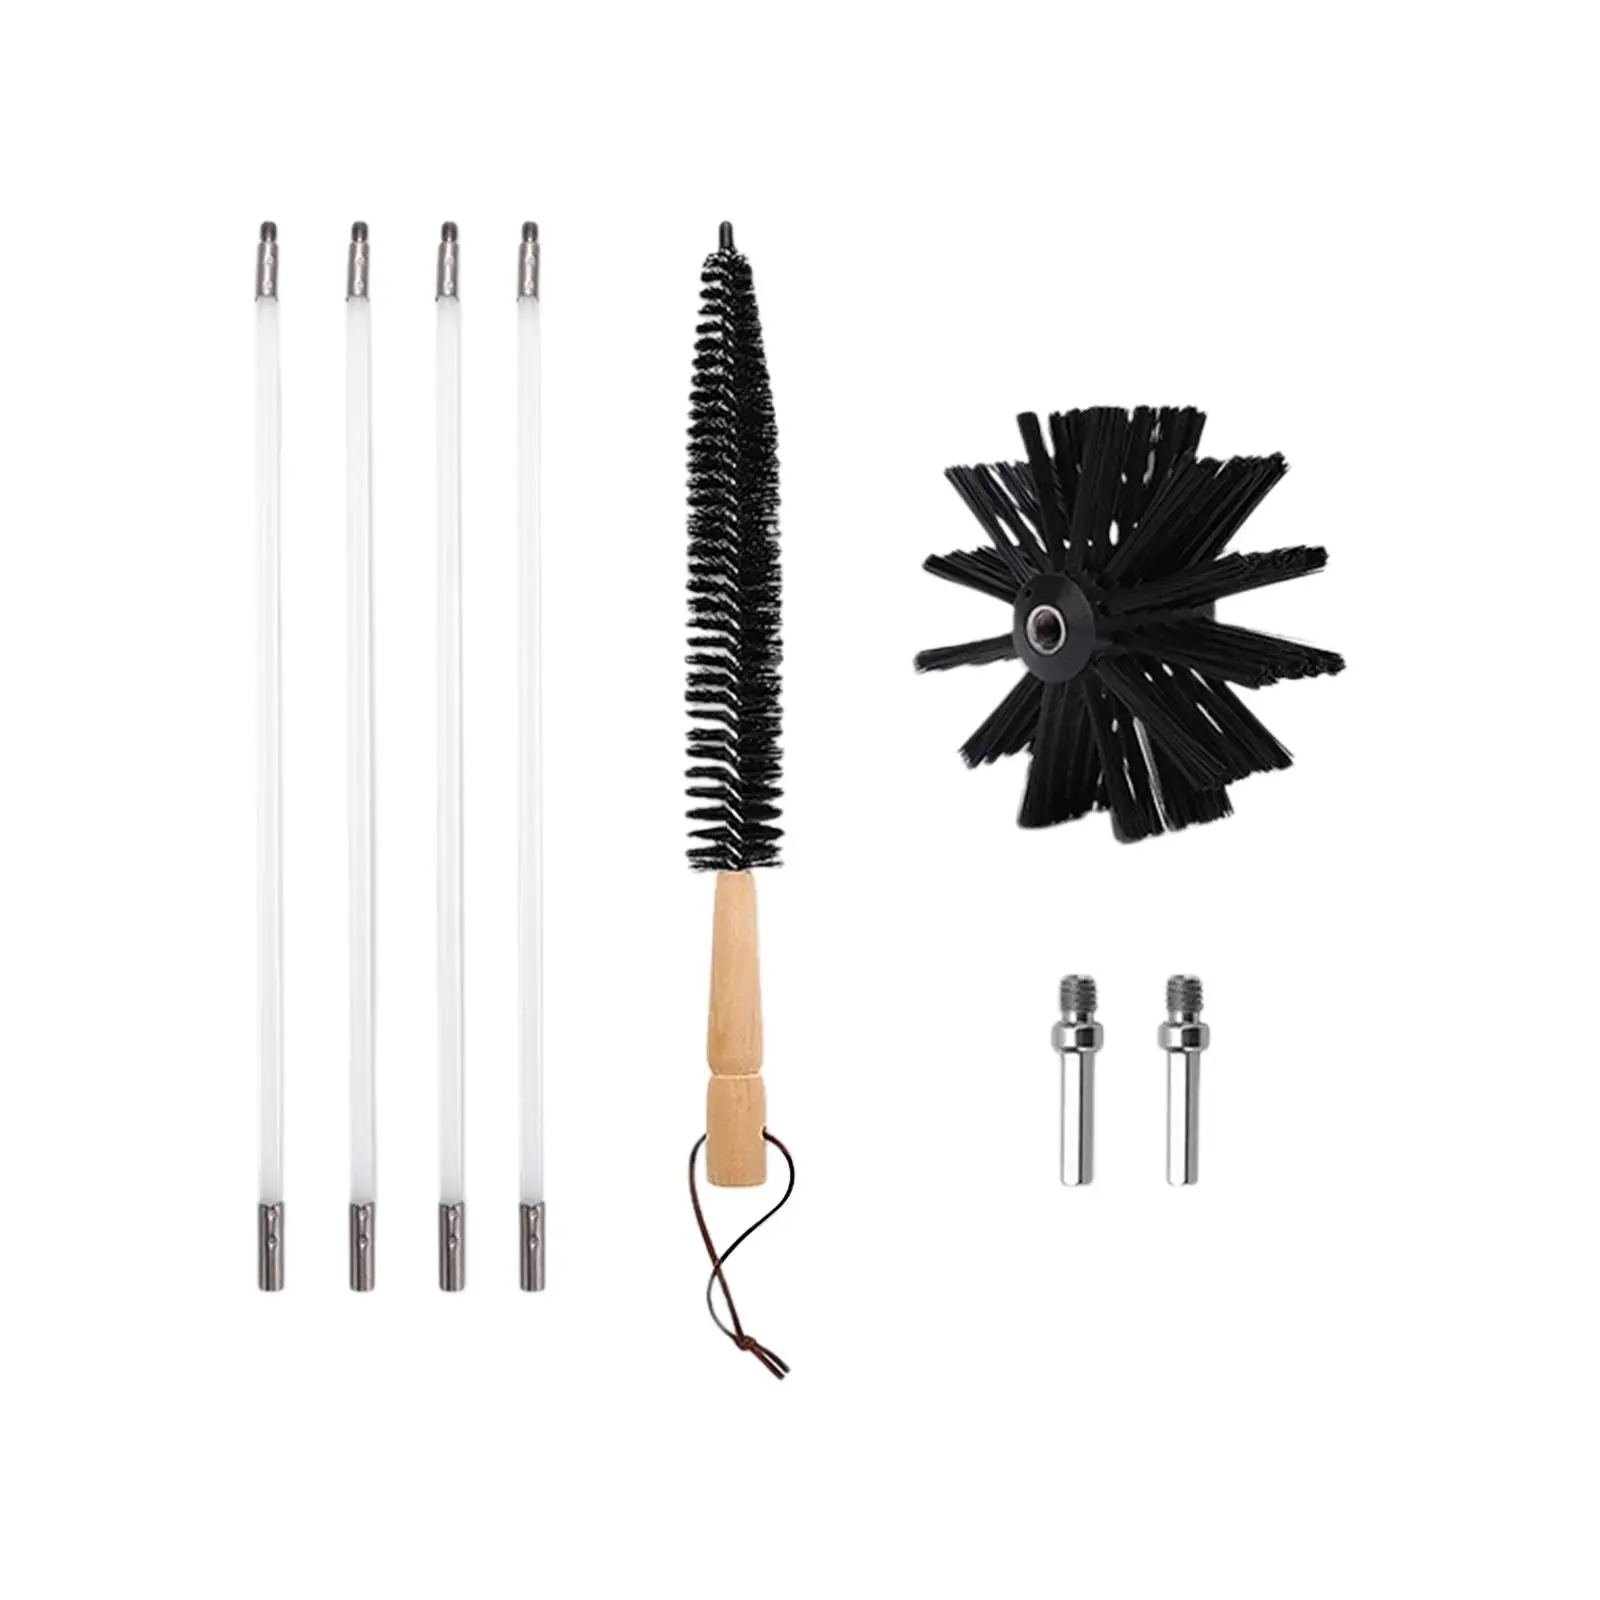 Dry Duct Cleaning Kit Flexible 4 Rods with Brush Head and Dryer Lint Brush, Heat Resistant Nylon Brush Bendable Rods Durable